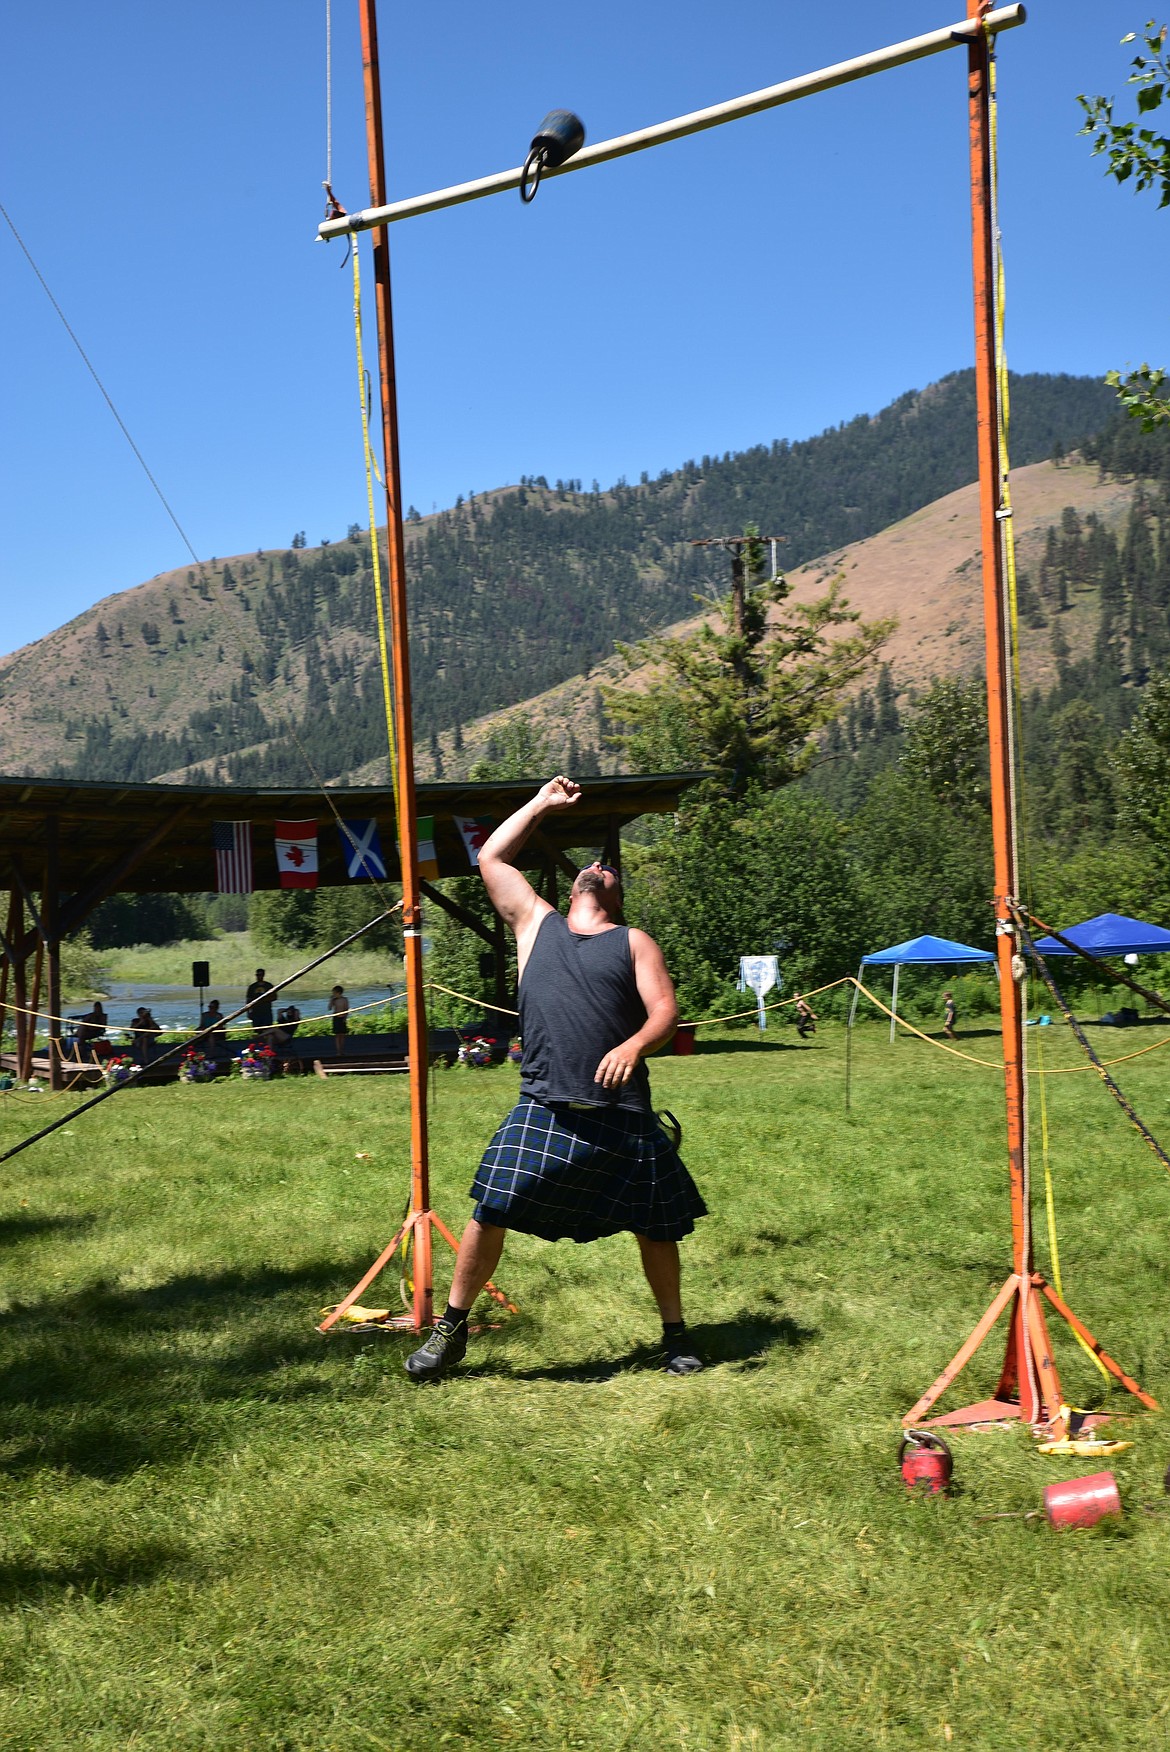 William Griffith, of Boise, competed in the weight over bar event Saturday at last weekend’s Kootenai Highland Gathering. Griffith, who said he has competed in events all over the West, cleared 16 feet with the 42-pound weight. (Scott Shindledecker/The Western News)